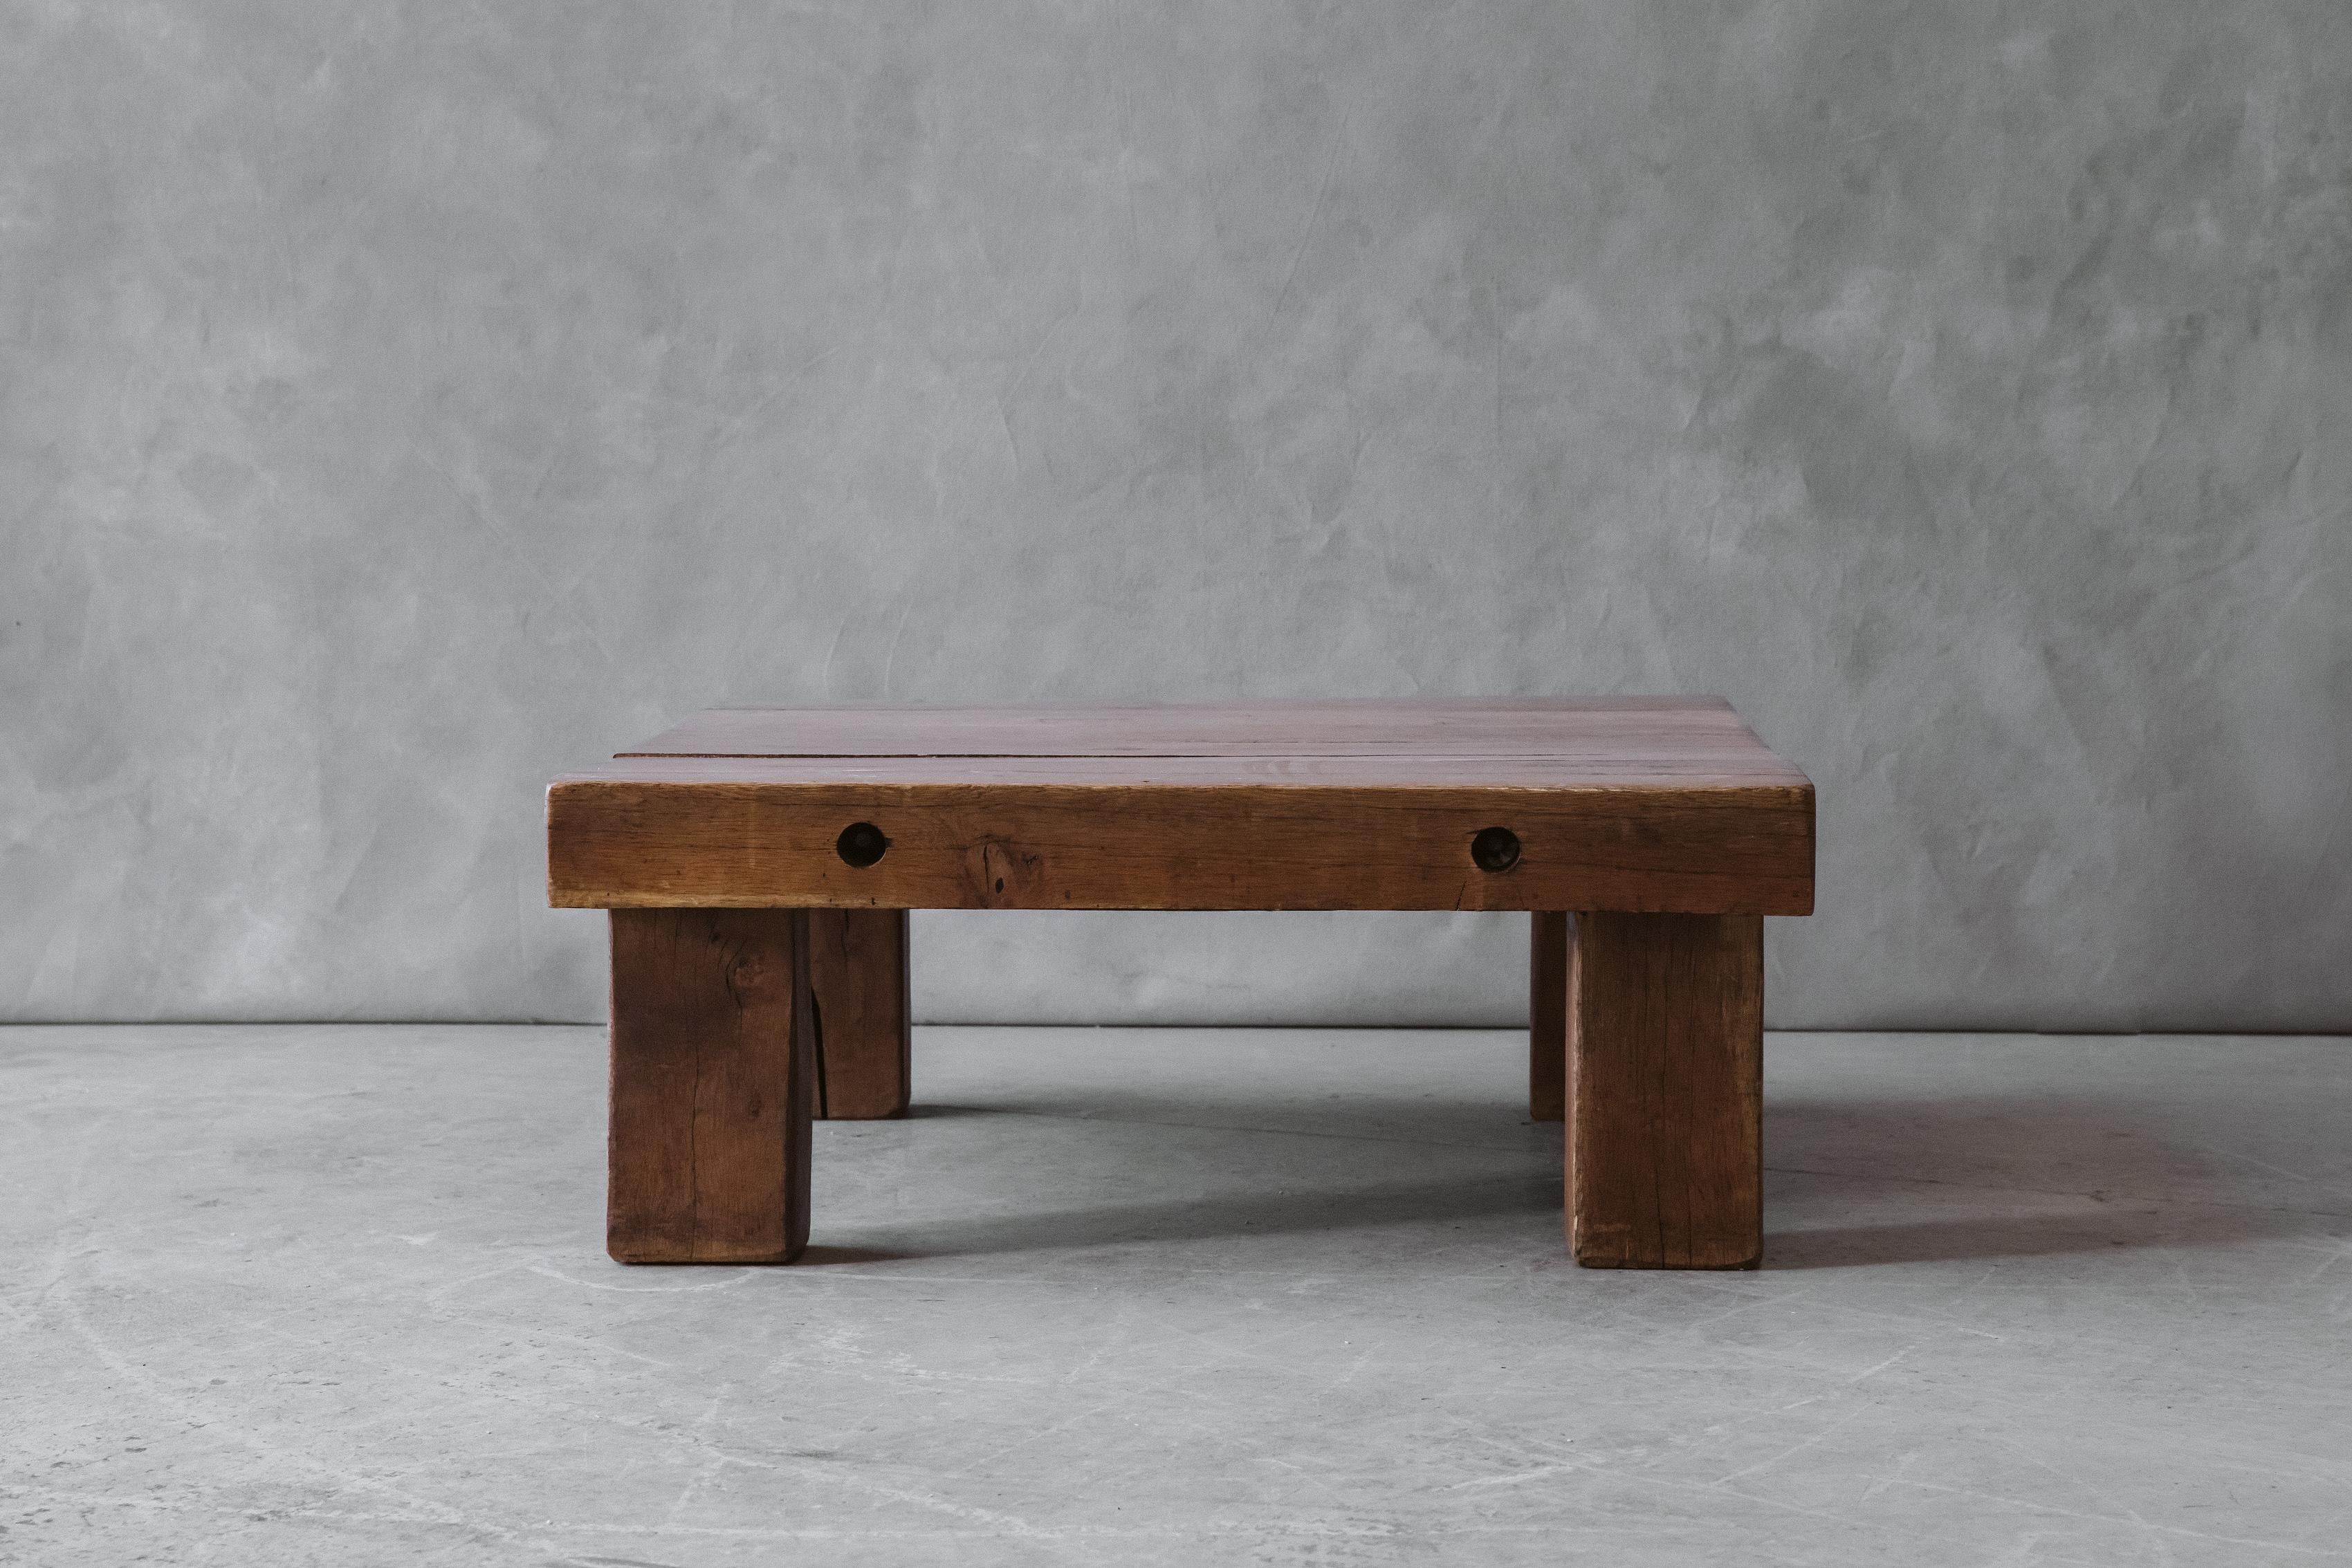 Vintage Oak Coffee Table From France, circa 1970. Solid, thick oak top with great color and patina. 

We prefer to speak directly with our clients. So, If you have any questions or would like to know more please give us a call or drop us a line.